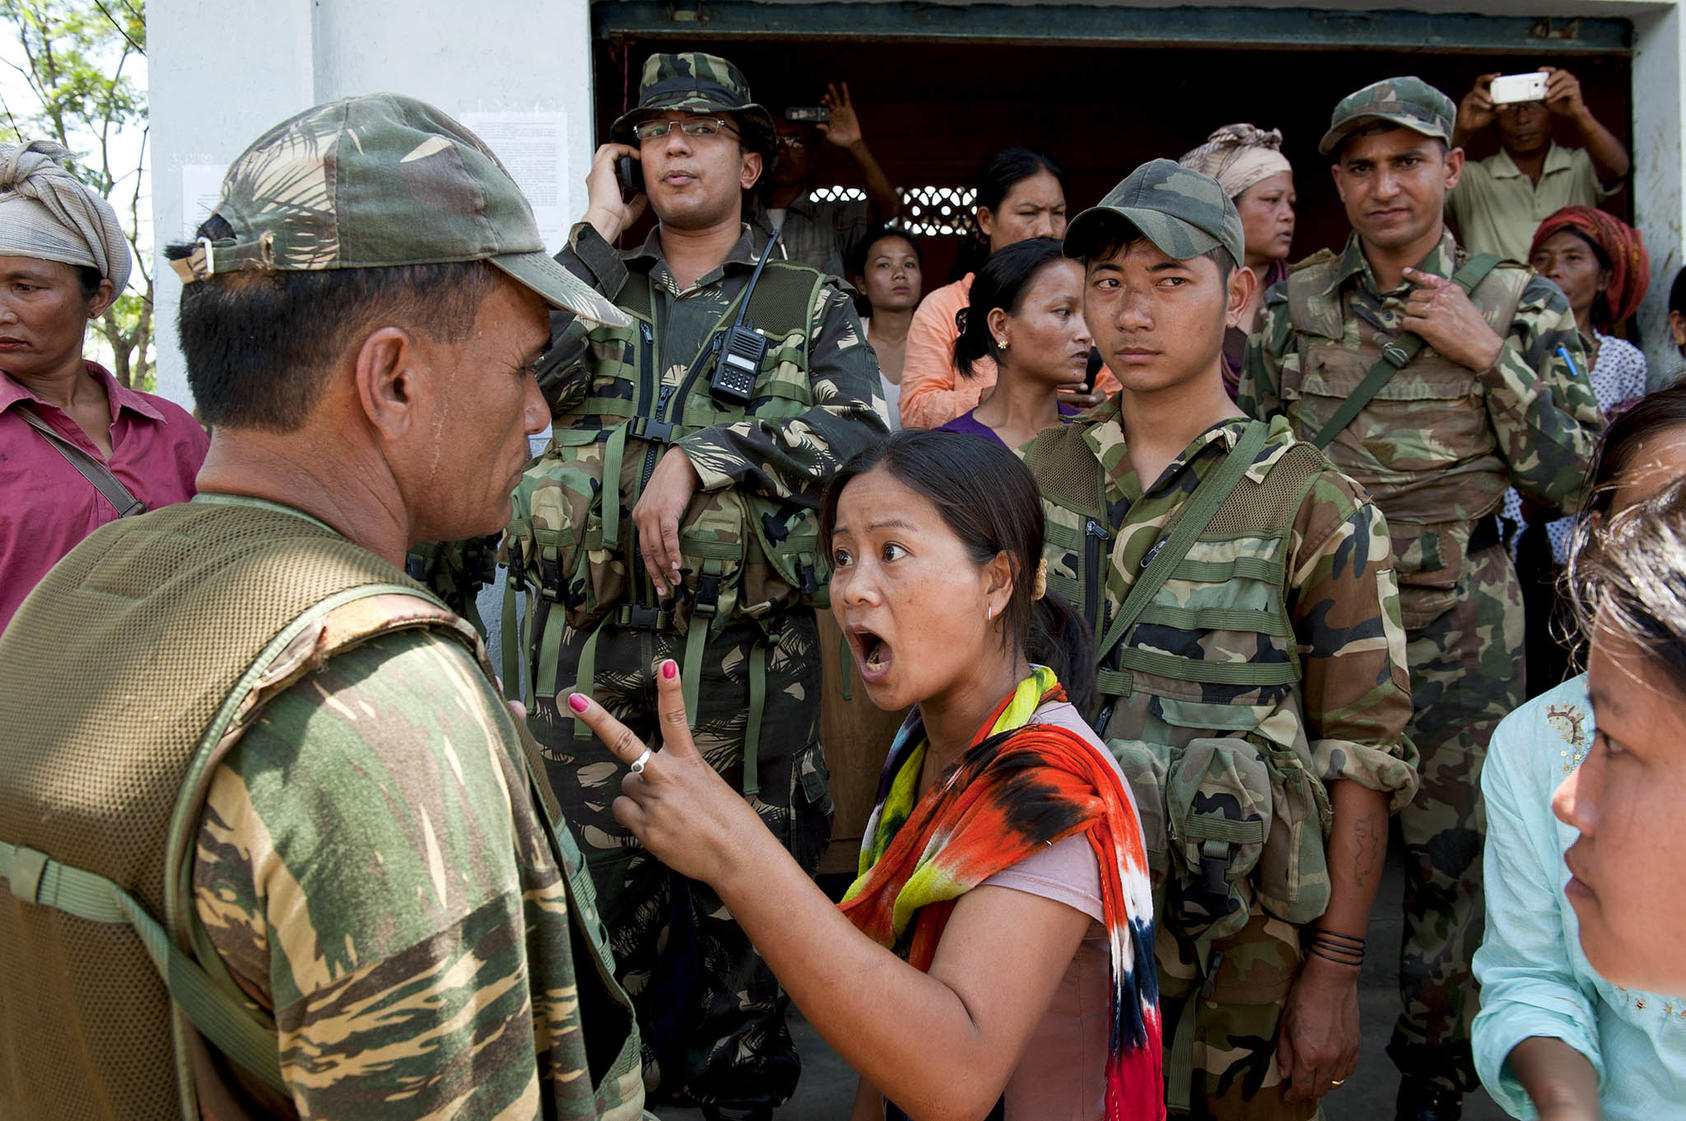 Ethnic violence in India's north-eastern state of Manipur has resulted in at least 54 deaths and 23,000 displaced persons.